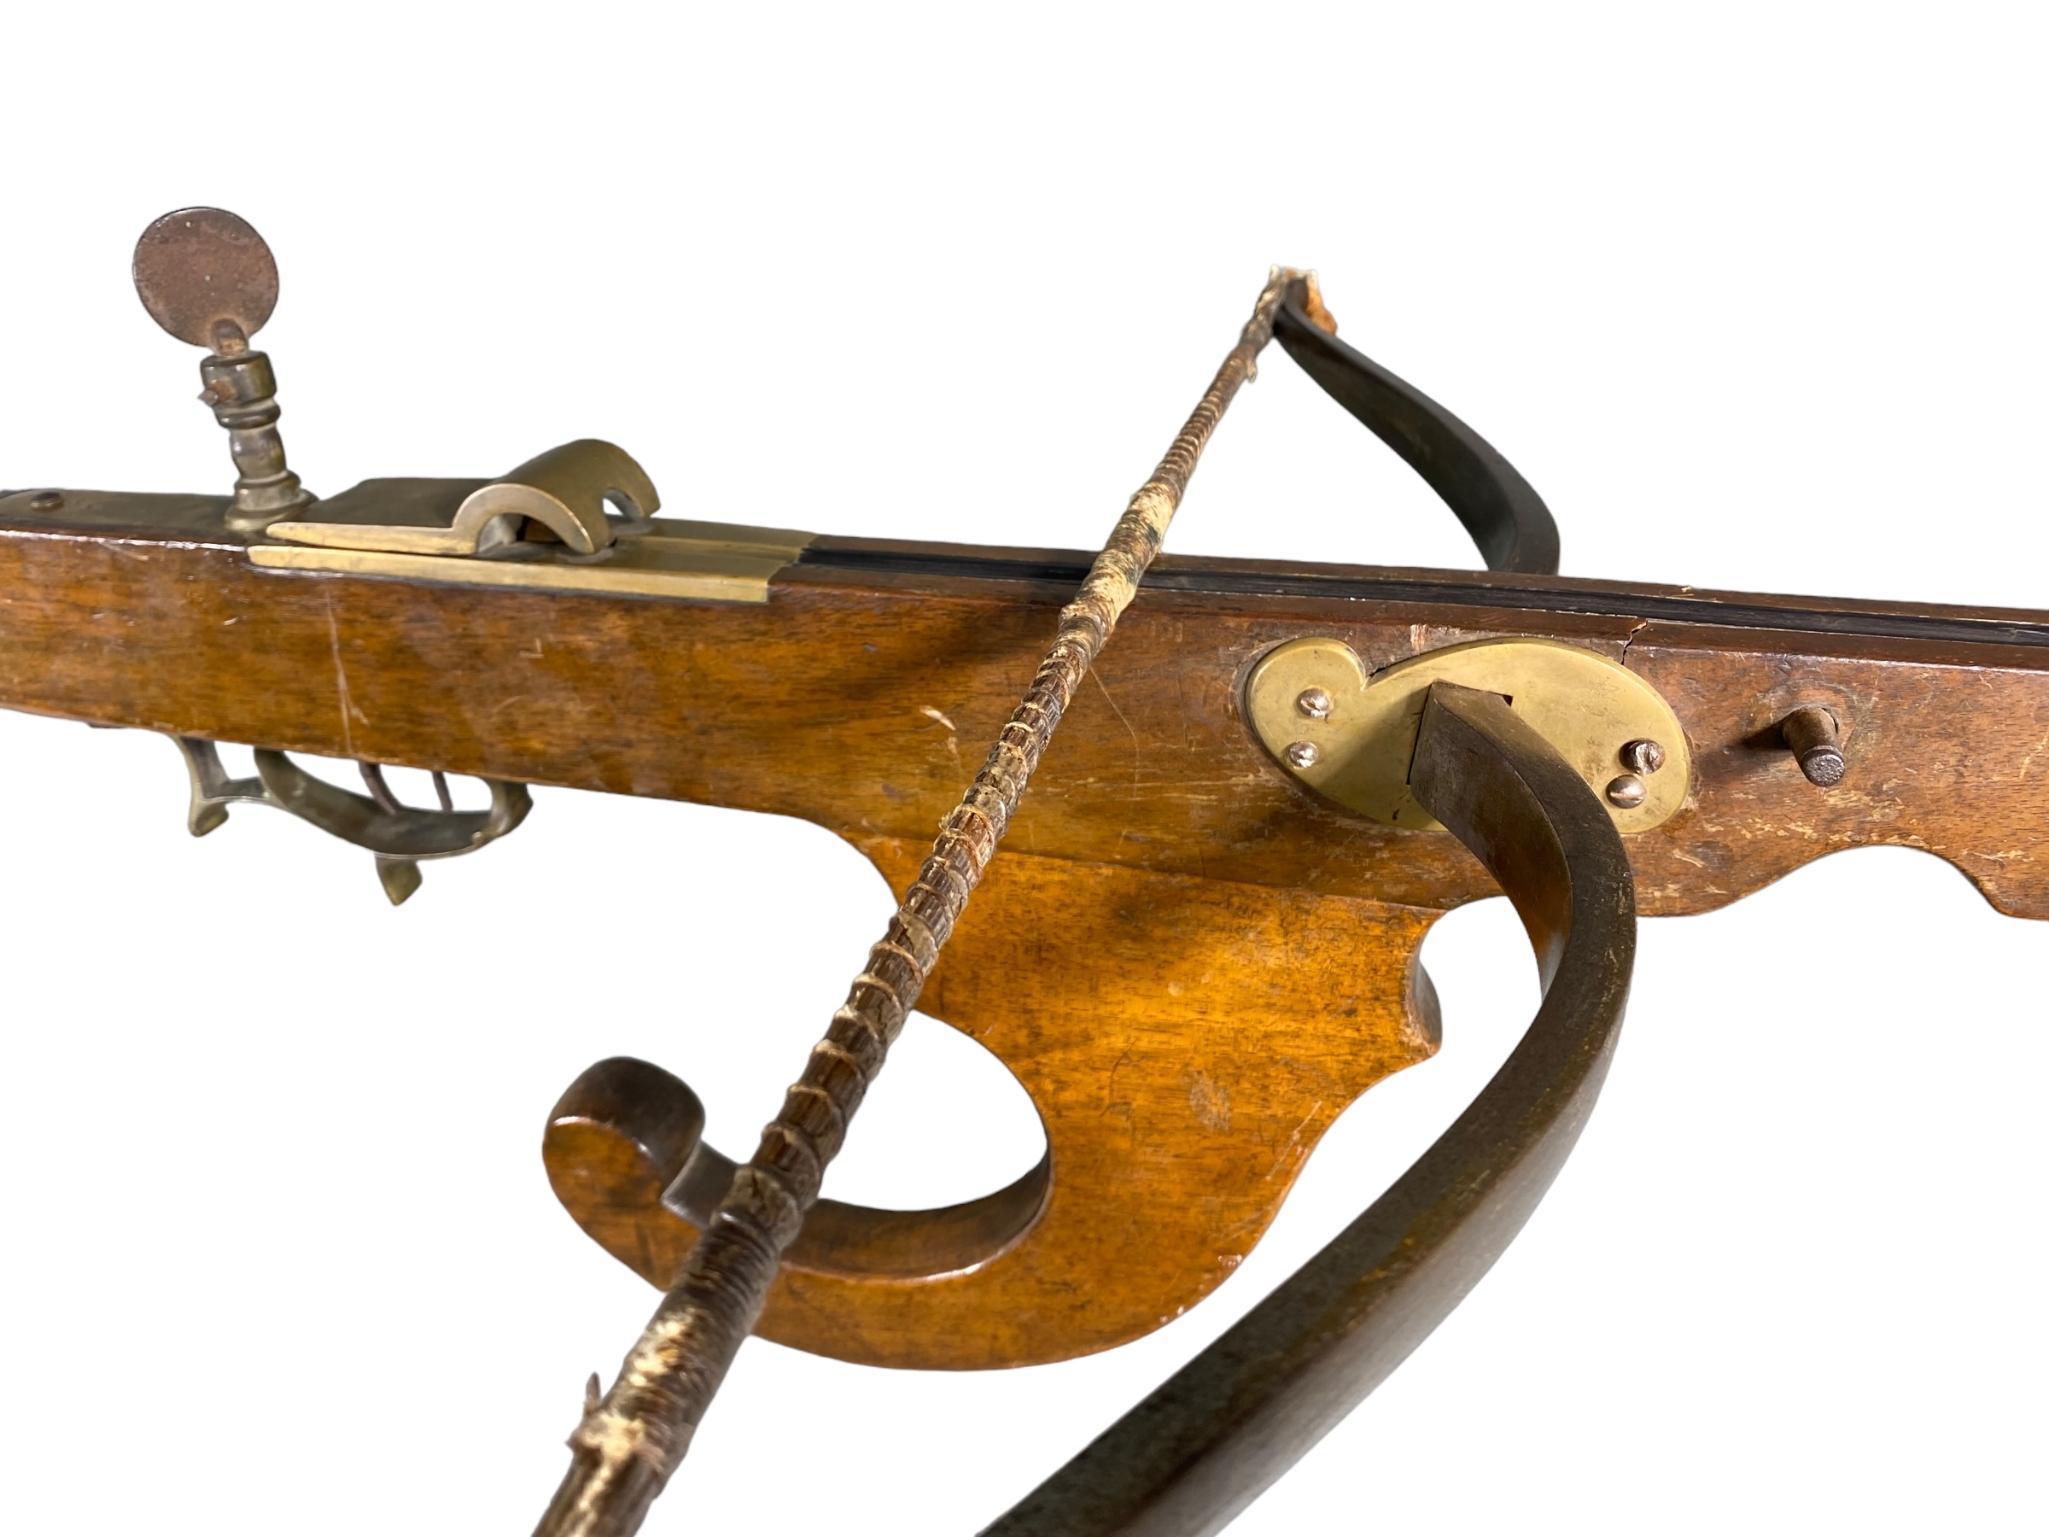 UNUSUAL 19TH CENTURY FULL SIZED MEDIEVAL CROSSBOW